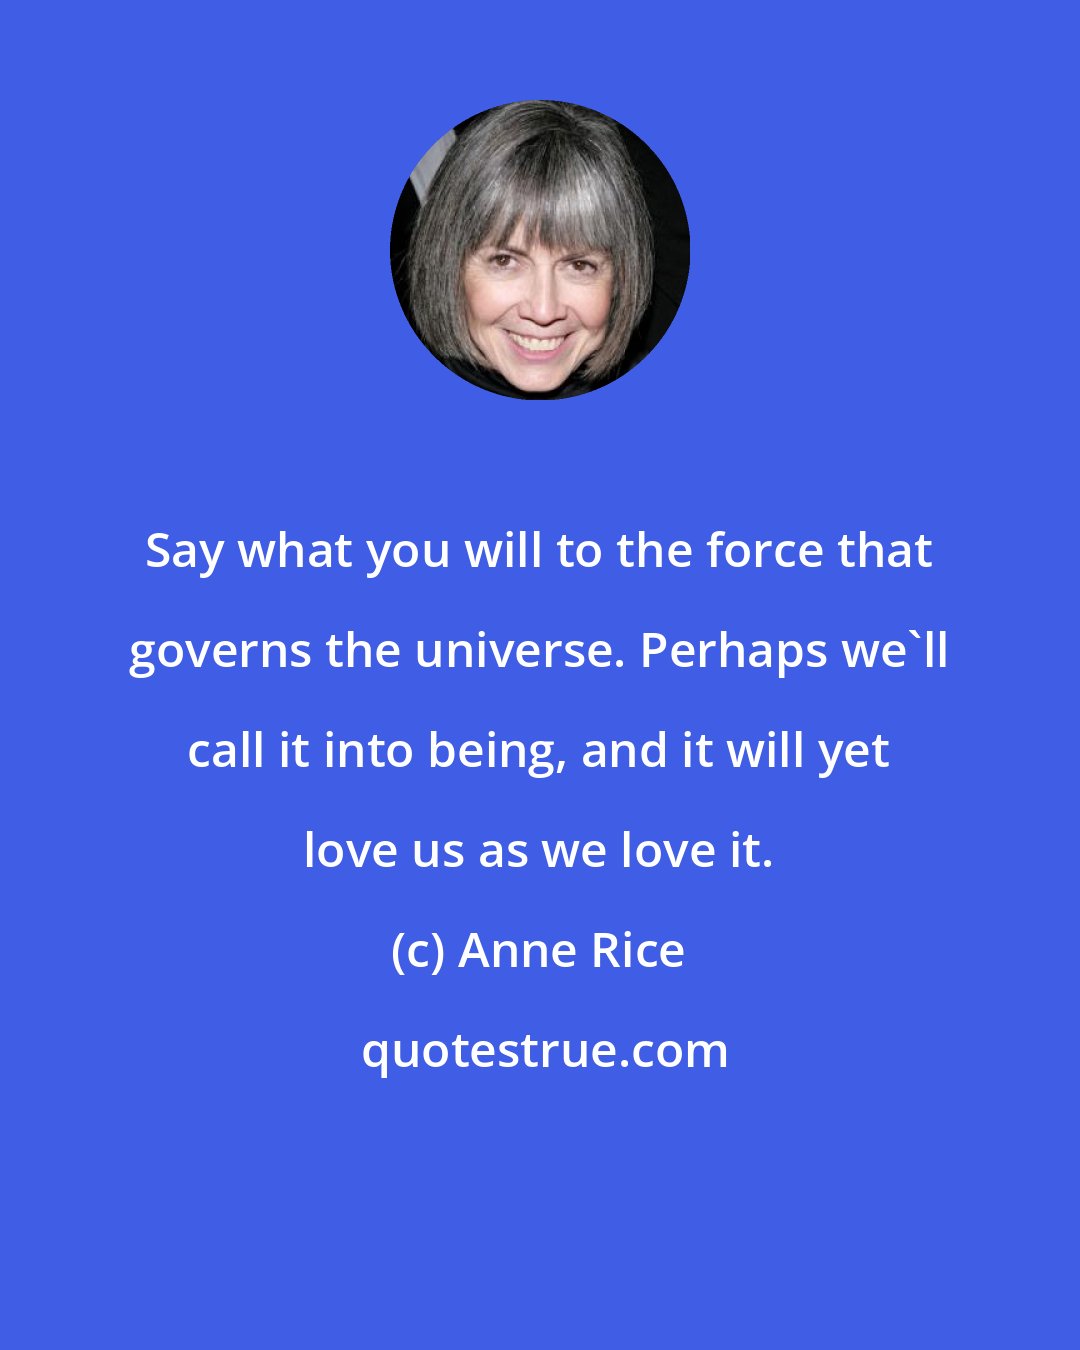 Anne Rice: Say what you will to the force that governs the universe. Perhaps we'll call it into being, and it will yet love us as we love it.